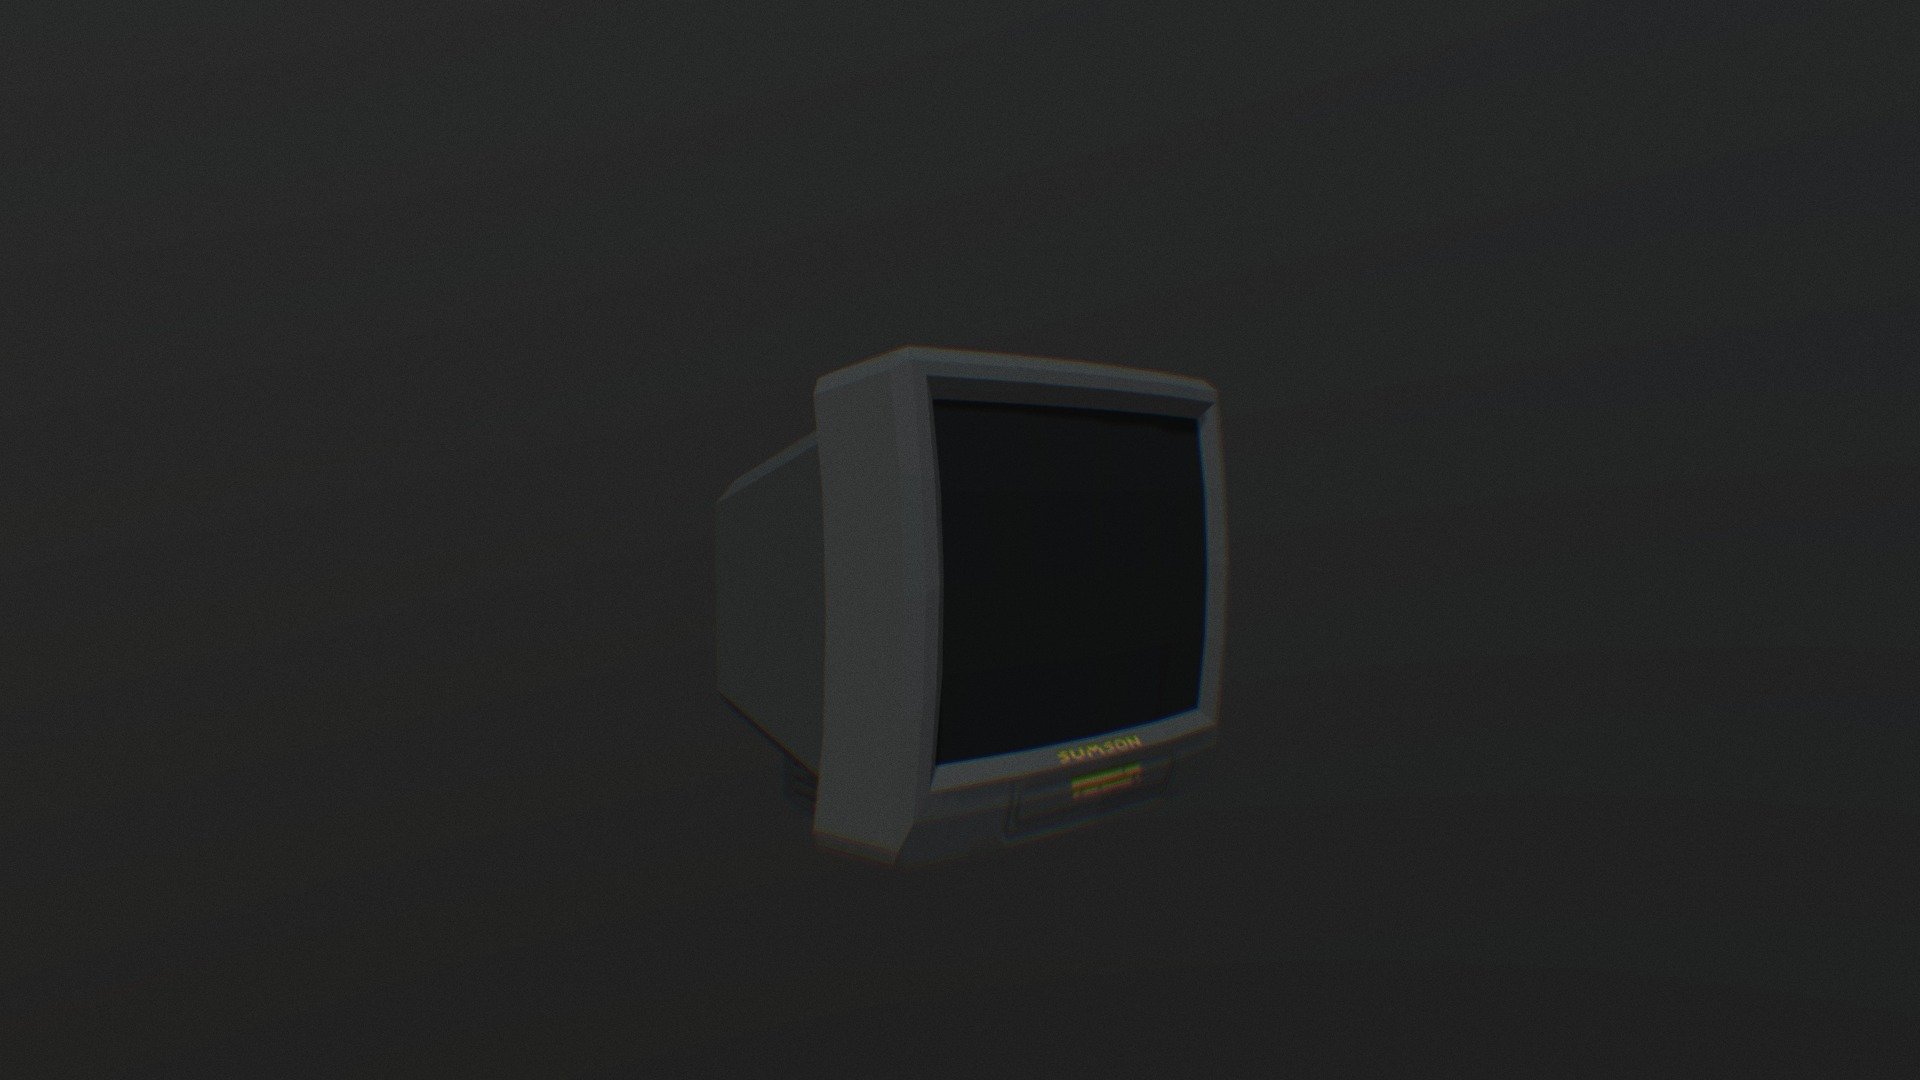 my first time modeling anything.. turned out better than i expected. going to start working on bigger projects 3d model